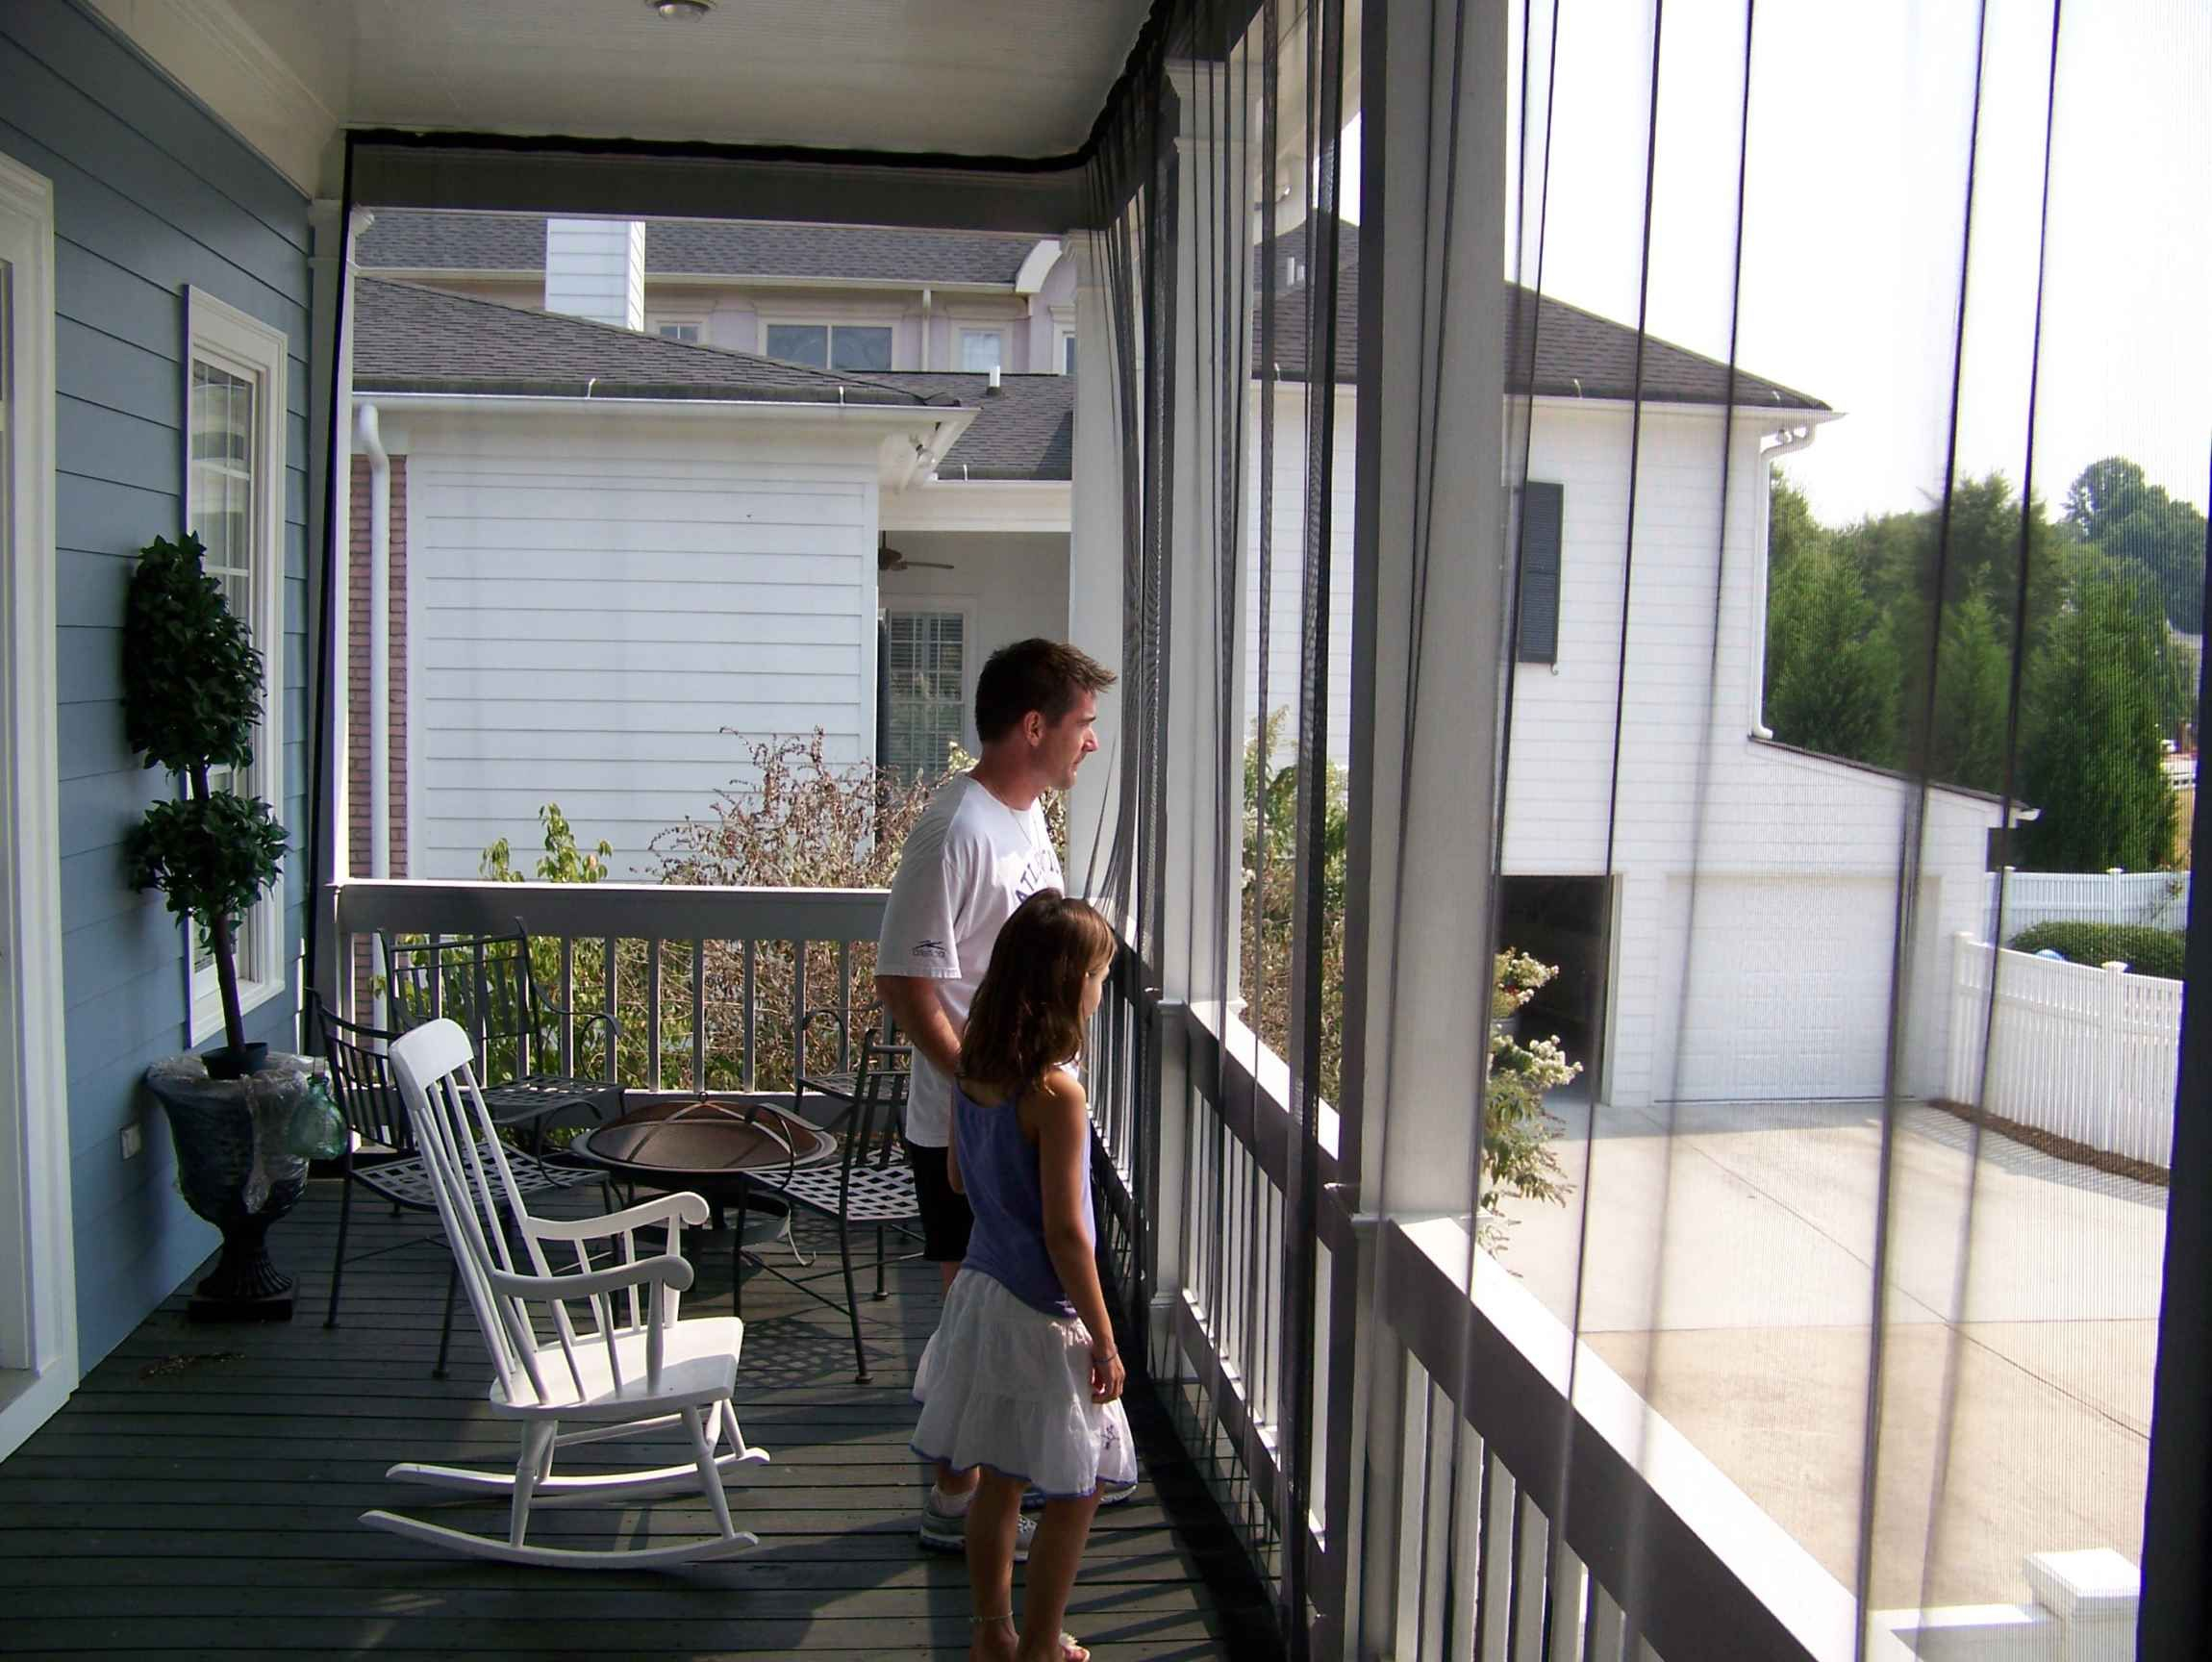 Mosquito Netting Mesh Curtains For The Balcony Want For The inside sizing 2300 X 1728